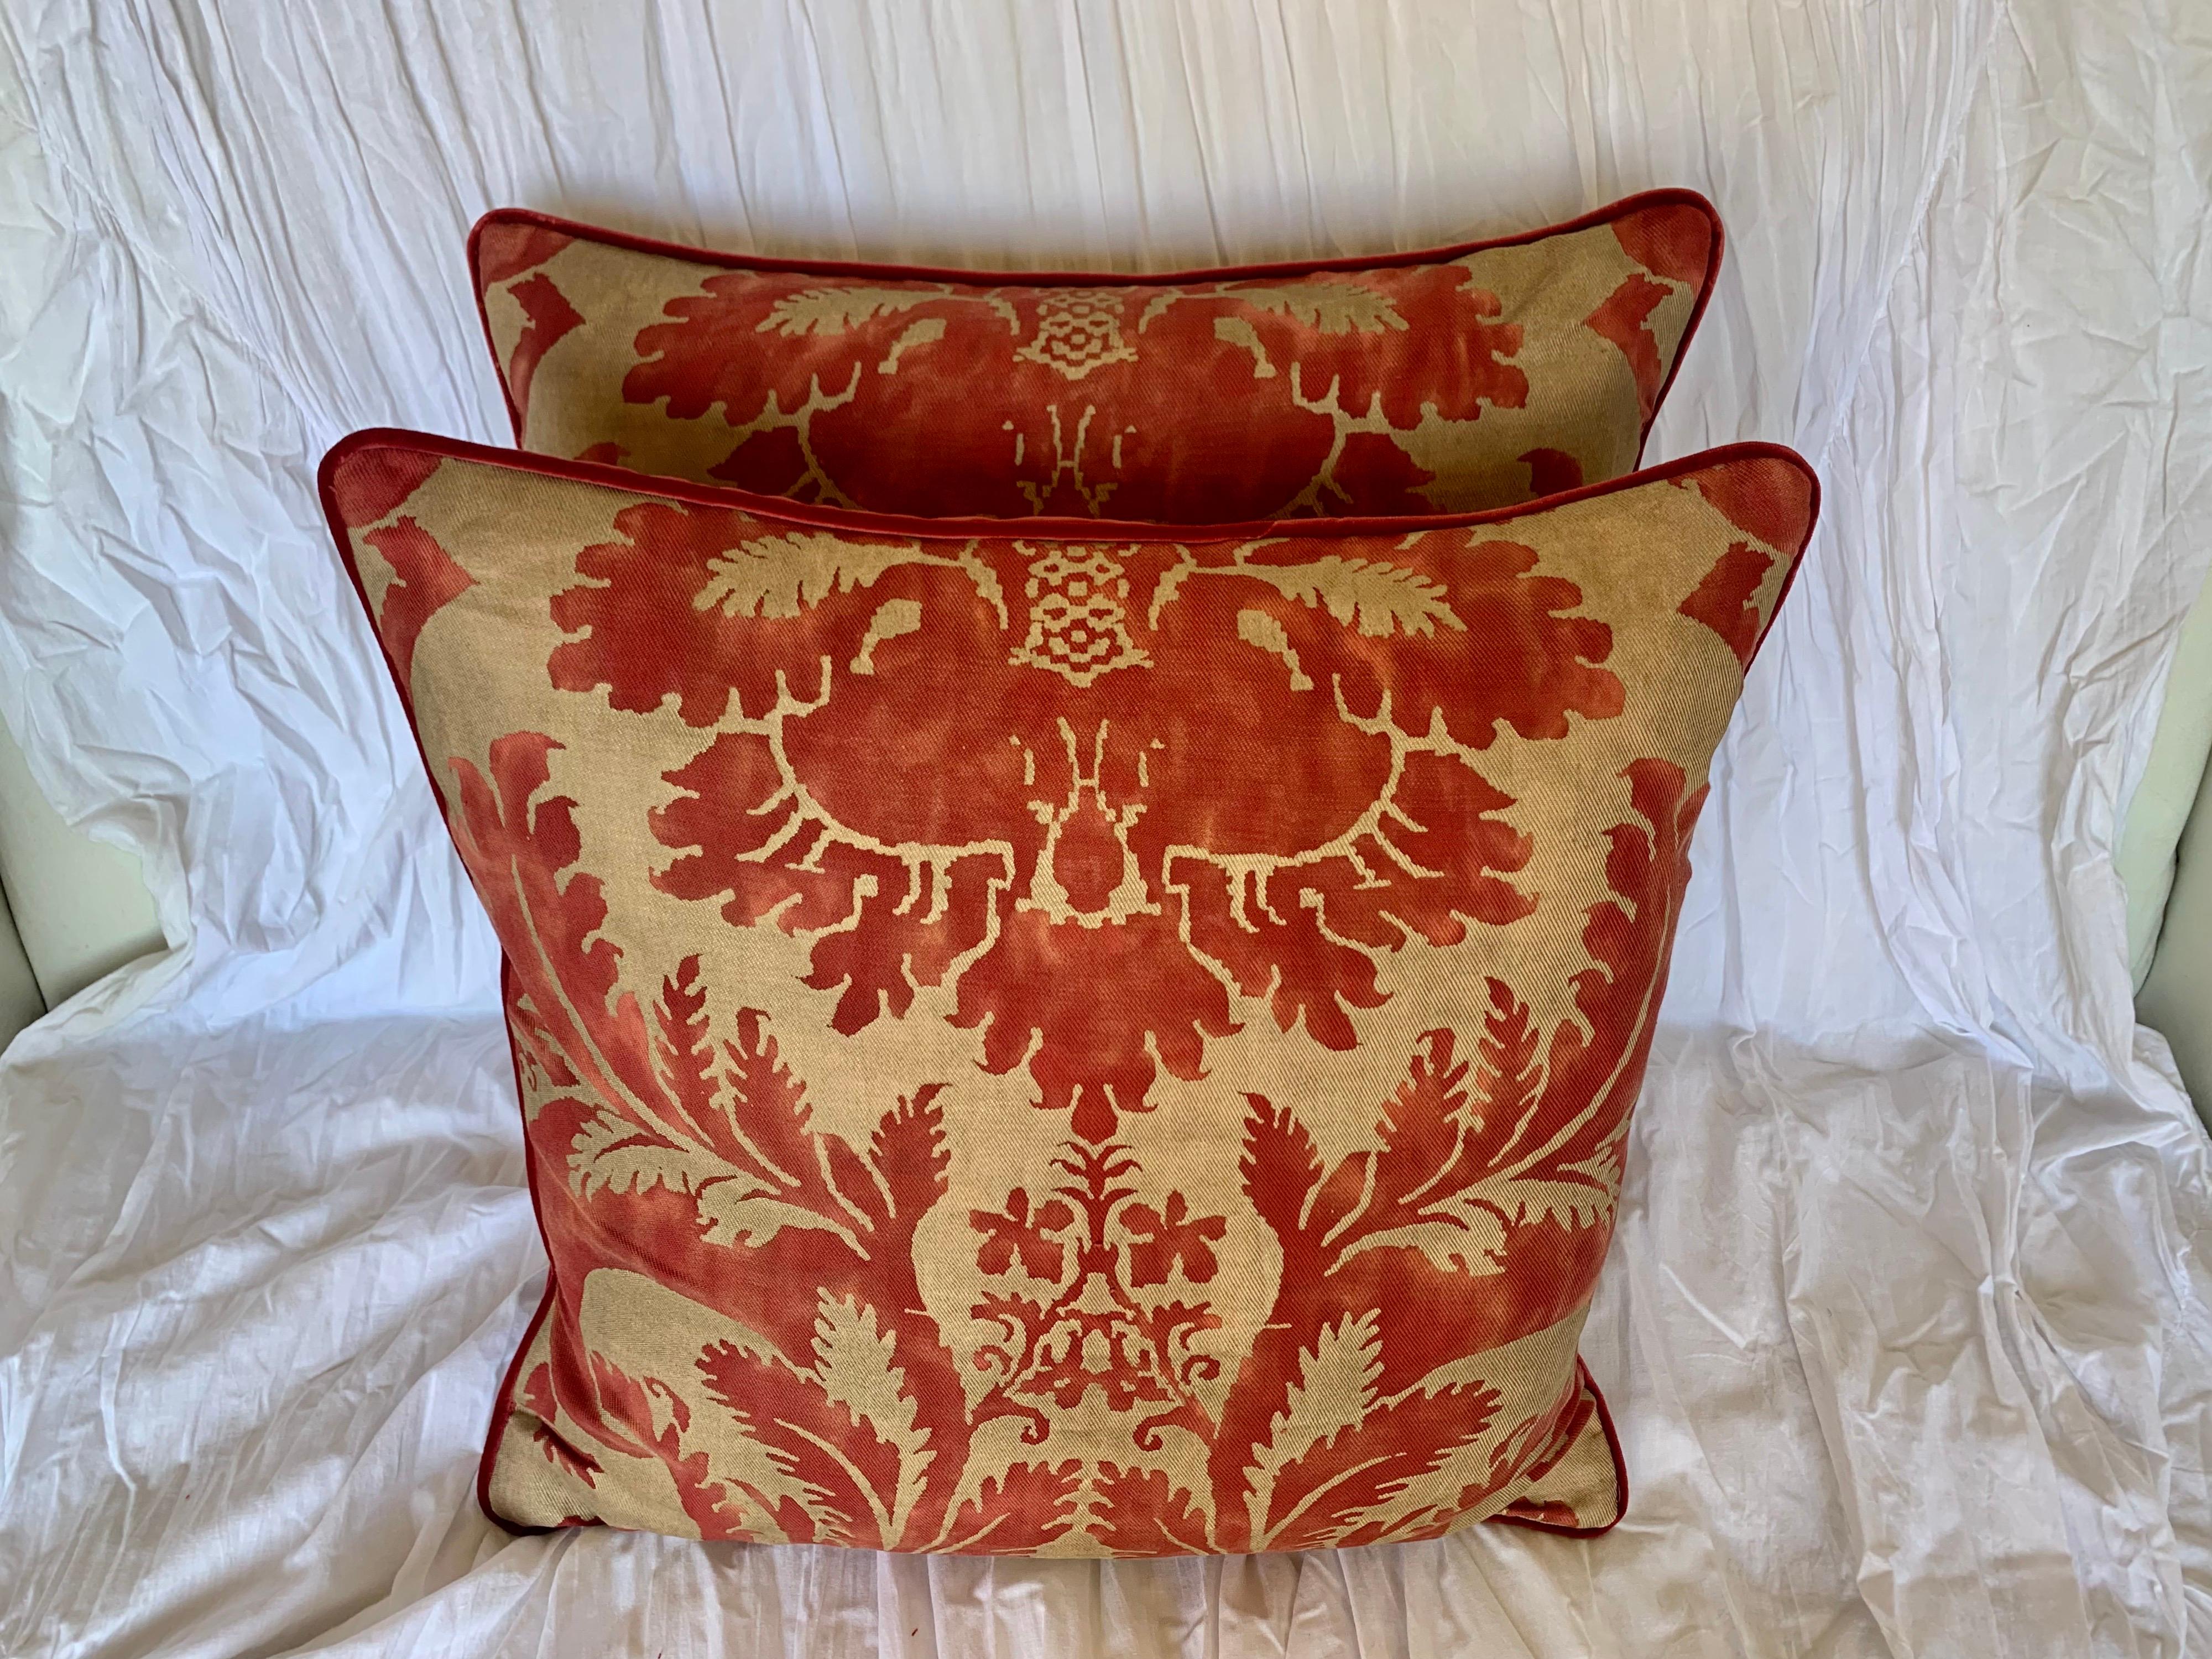 Pair of custom pillows made with authentic vintage red & gold Fortuny fronts combined with red velvet backs. Self cording. Down inserts, sewn closed.